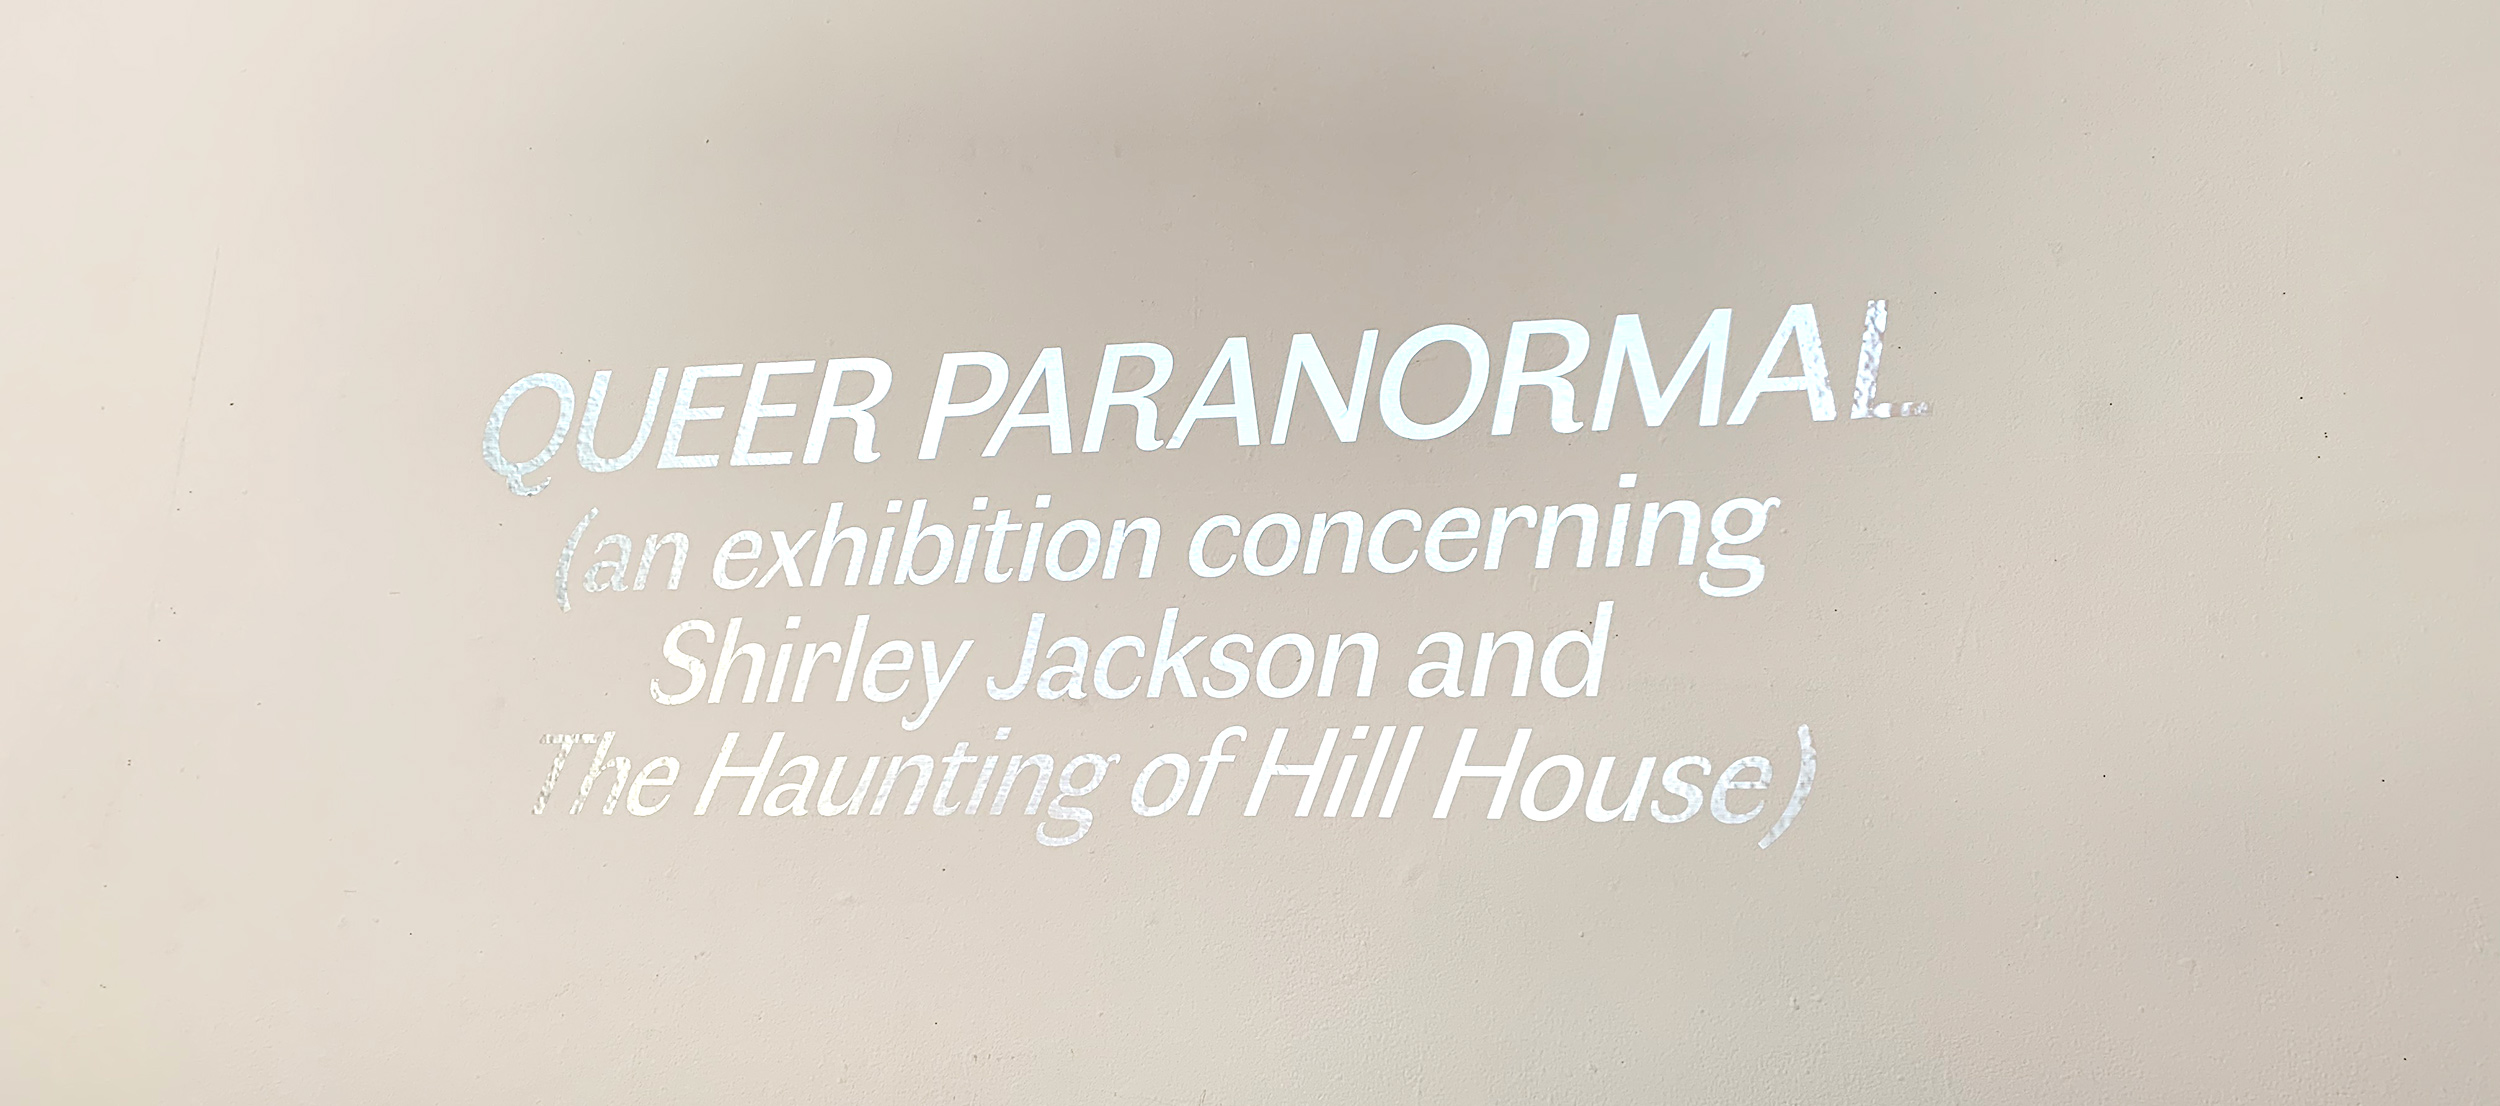 Queer Paranormal entrance text